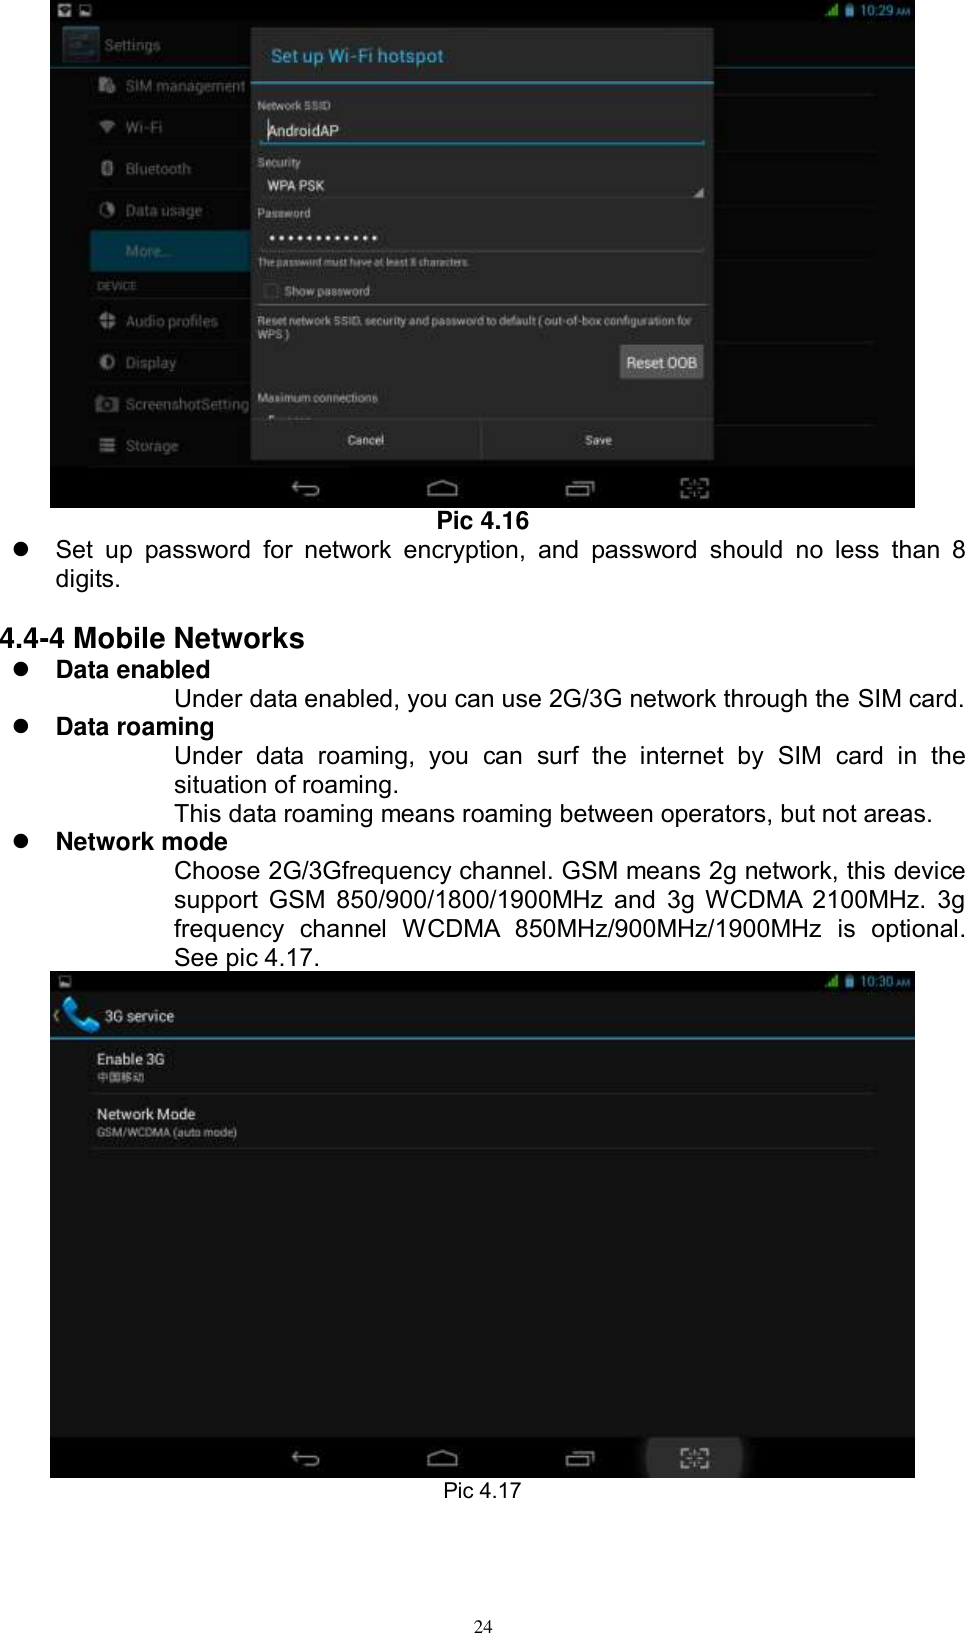      24  Pic 4.16   Set  up  password  for  network  encryption,  and  password  should  no  less  than  8 digits.      4.4-4 Mobile Networks  Data enabled Under data enabled, you can use 2G/3G network through the SIM card.    Data roaming Under  data  roaming,  you  can  surf  the  internet  by  SIM  card  in  the situation of roaming.   This data roaming means roaming between operators, but not areas.  Network mode Choose 2G/3Gfrequency channel. GSM means 2g network, this device support  GSM 850/900/1800/1900MHz  and  3g WCDMA  2100MHz. 3g frequency  channel  WCDMA  850MHz/900MHz/1900MHz  is  optional. See pic 4.17.  Pic 4.17 